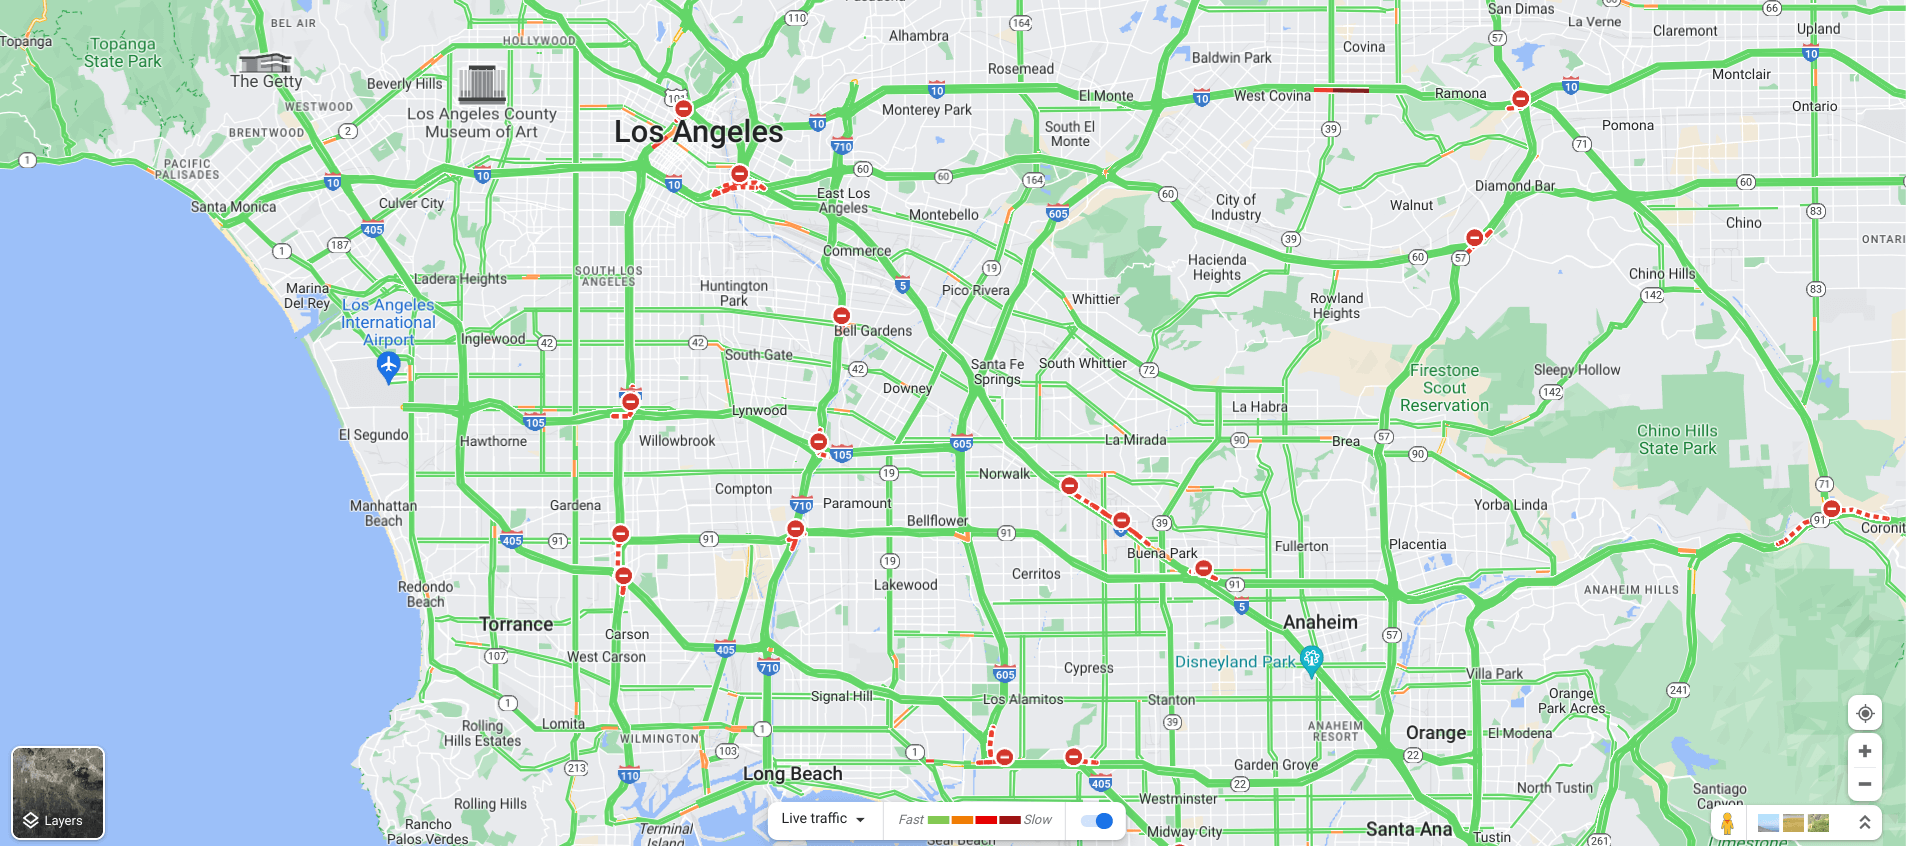 Real-time traffic updates in Google Maps